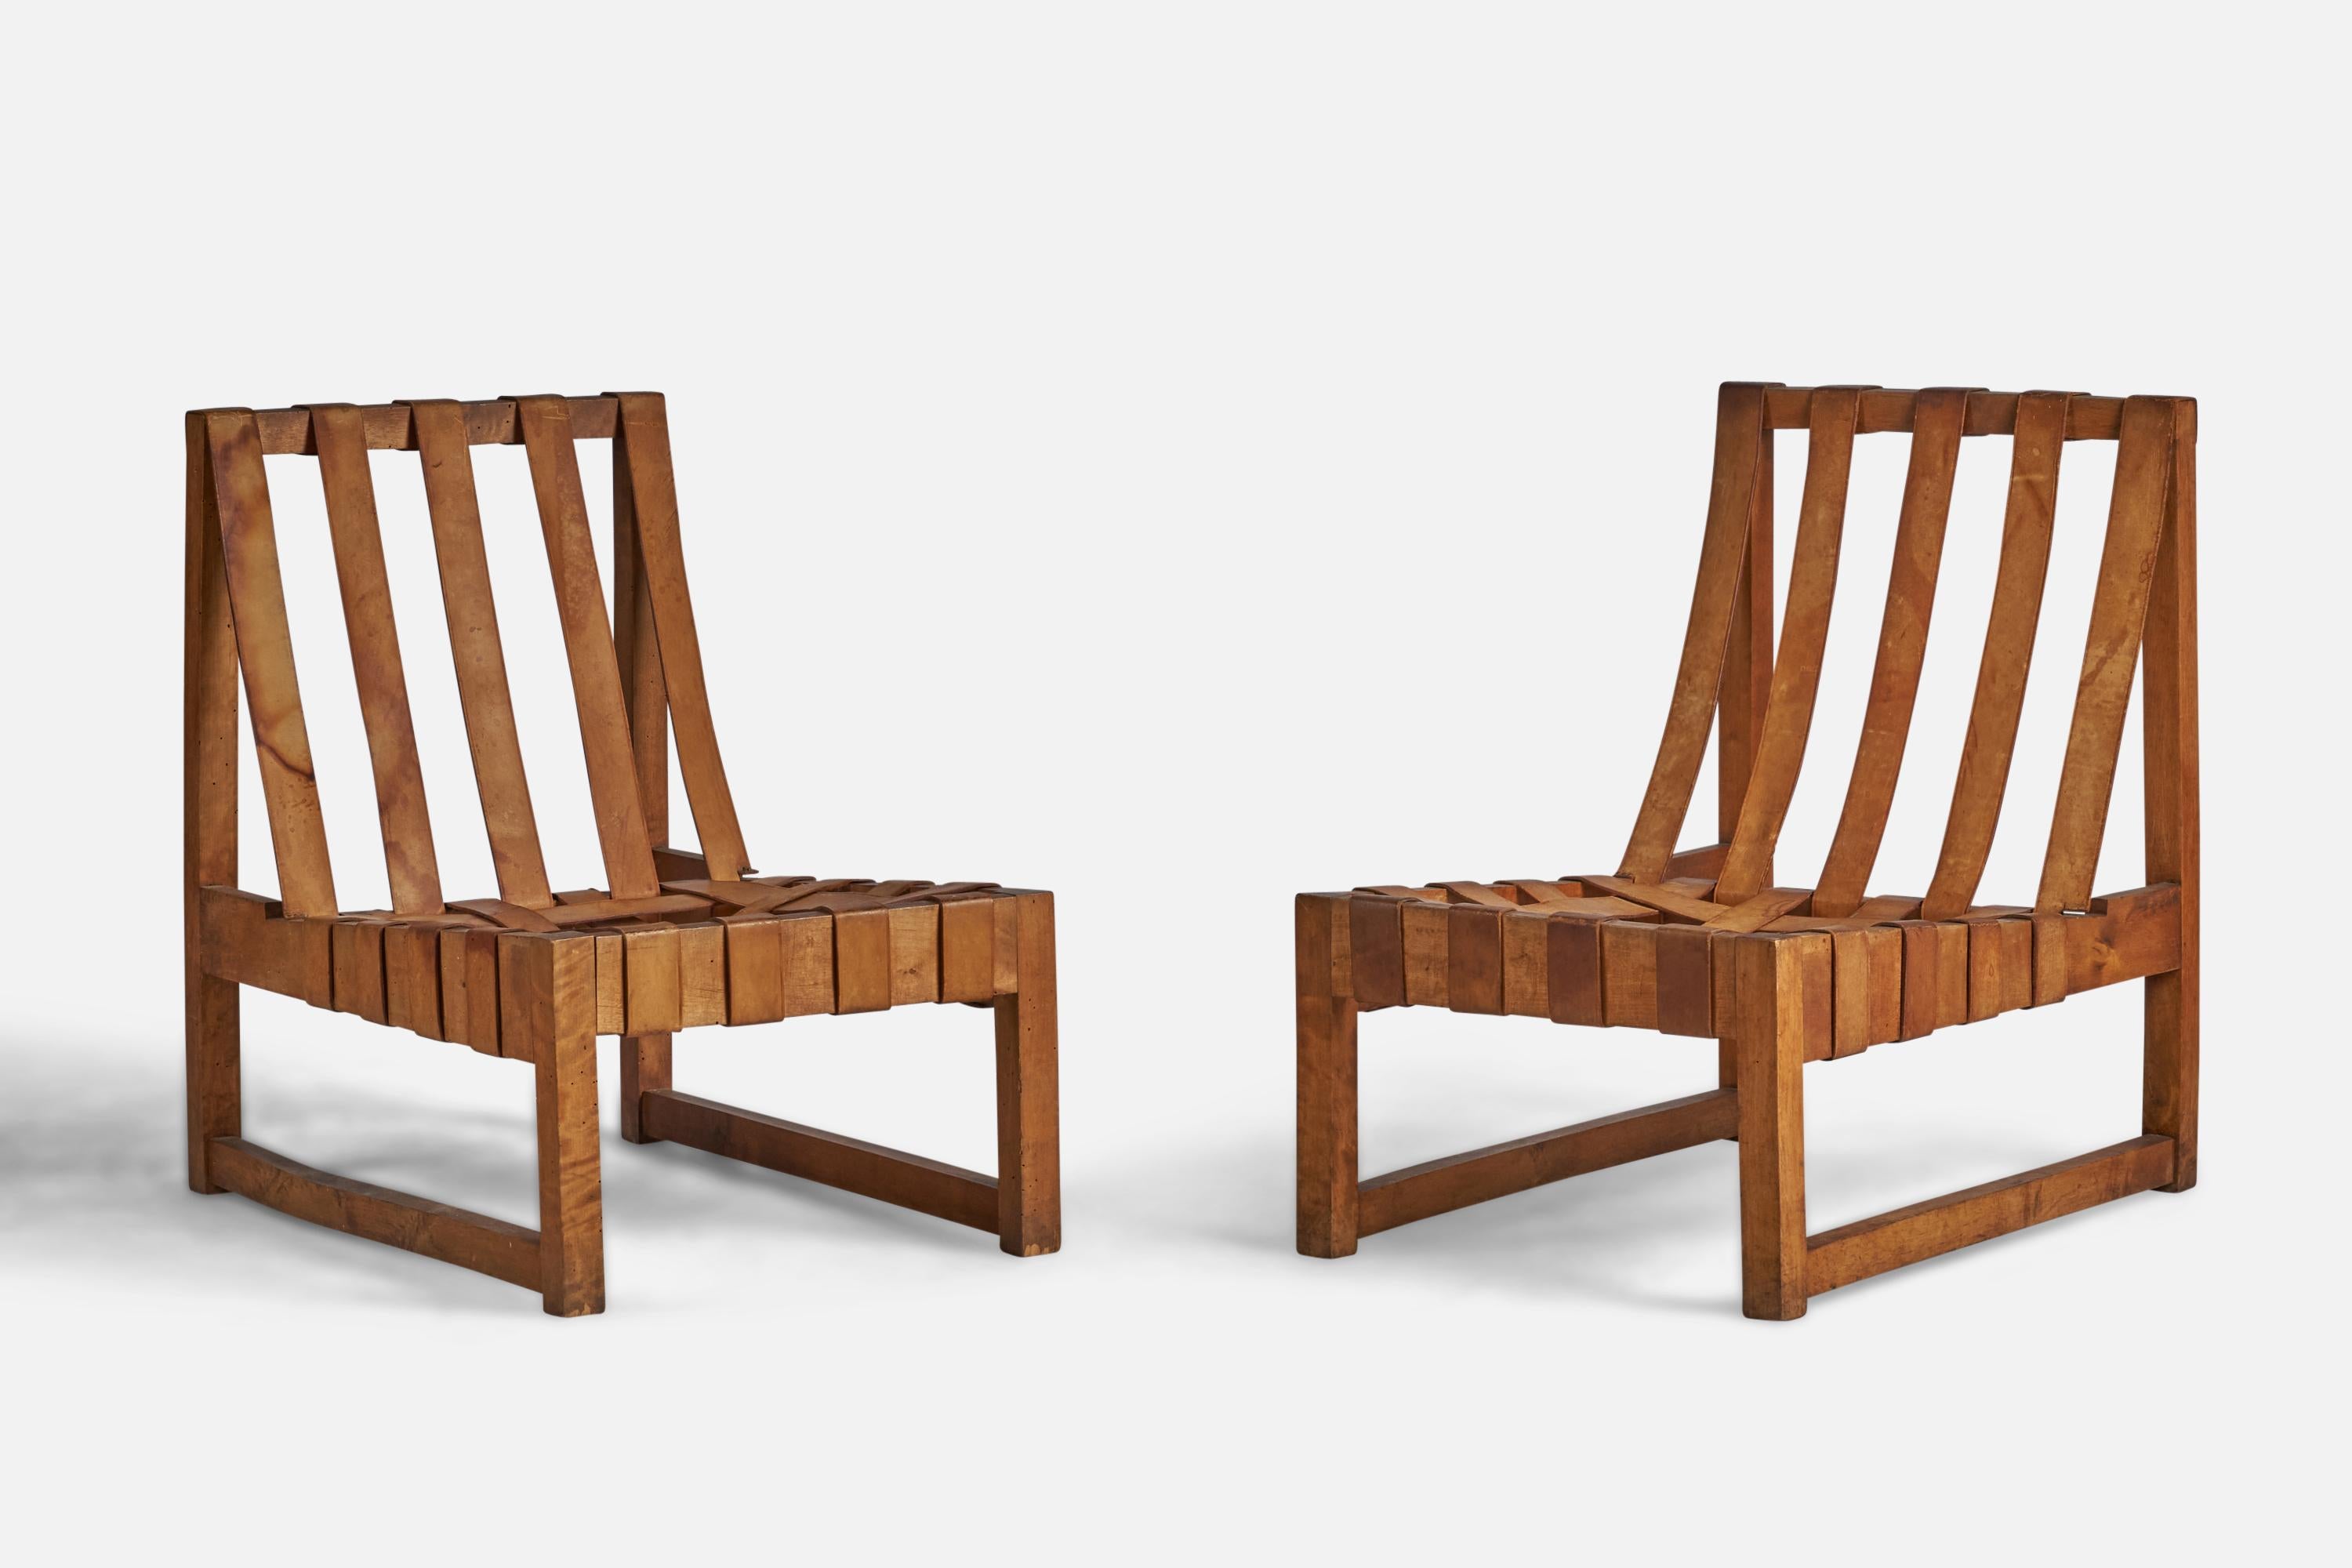 A pair of oak and leather lounge or slipper chairs designed and produced in the US, c. 1950s.

11.75” seat height